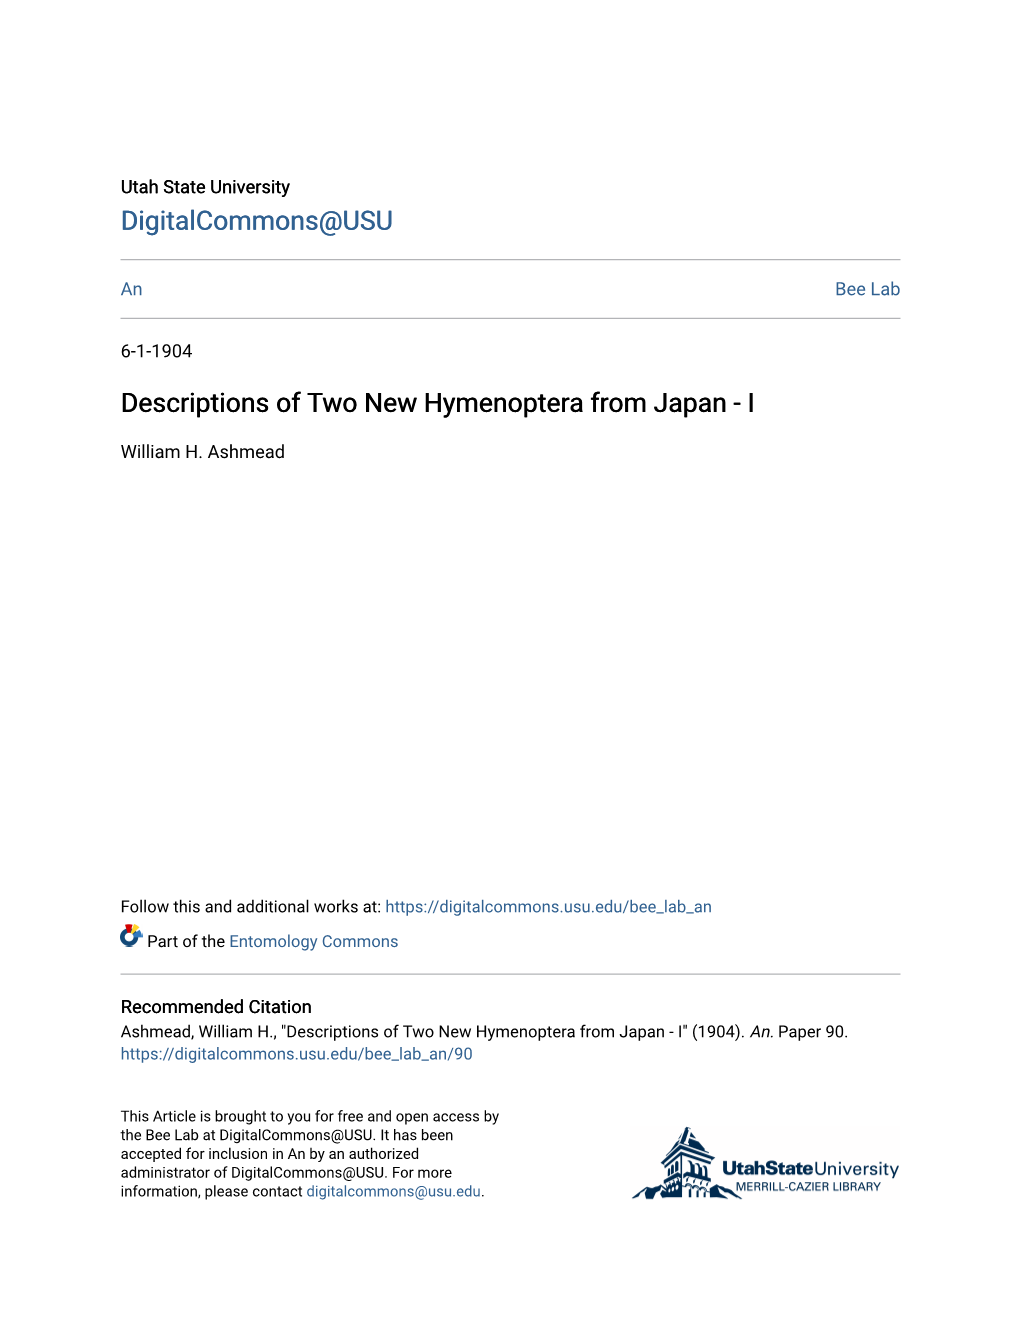 Descriptions of Two New Hymenoptera from Japan - I